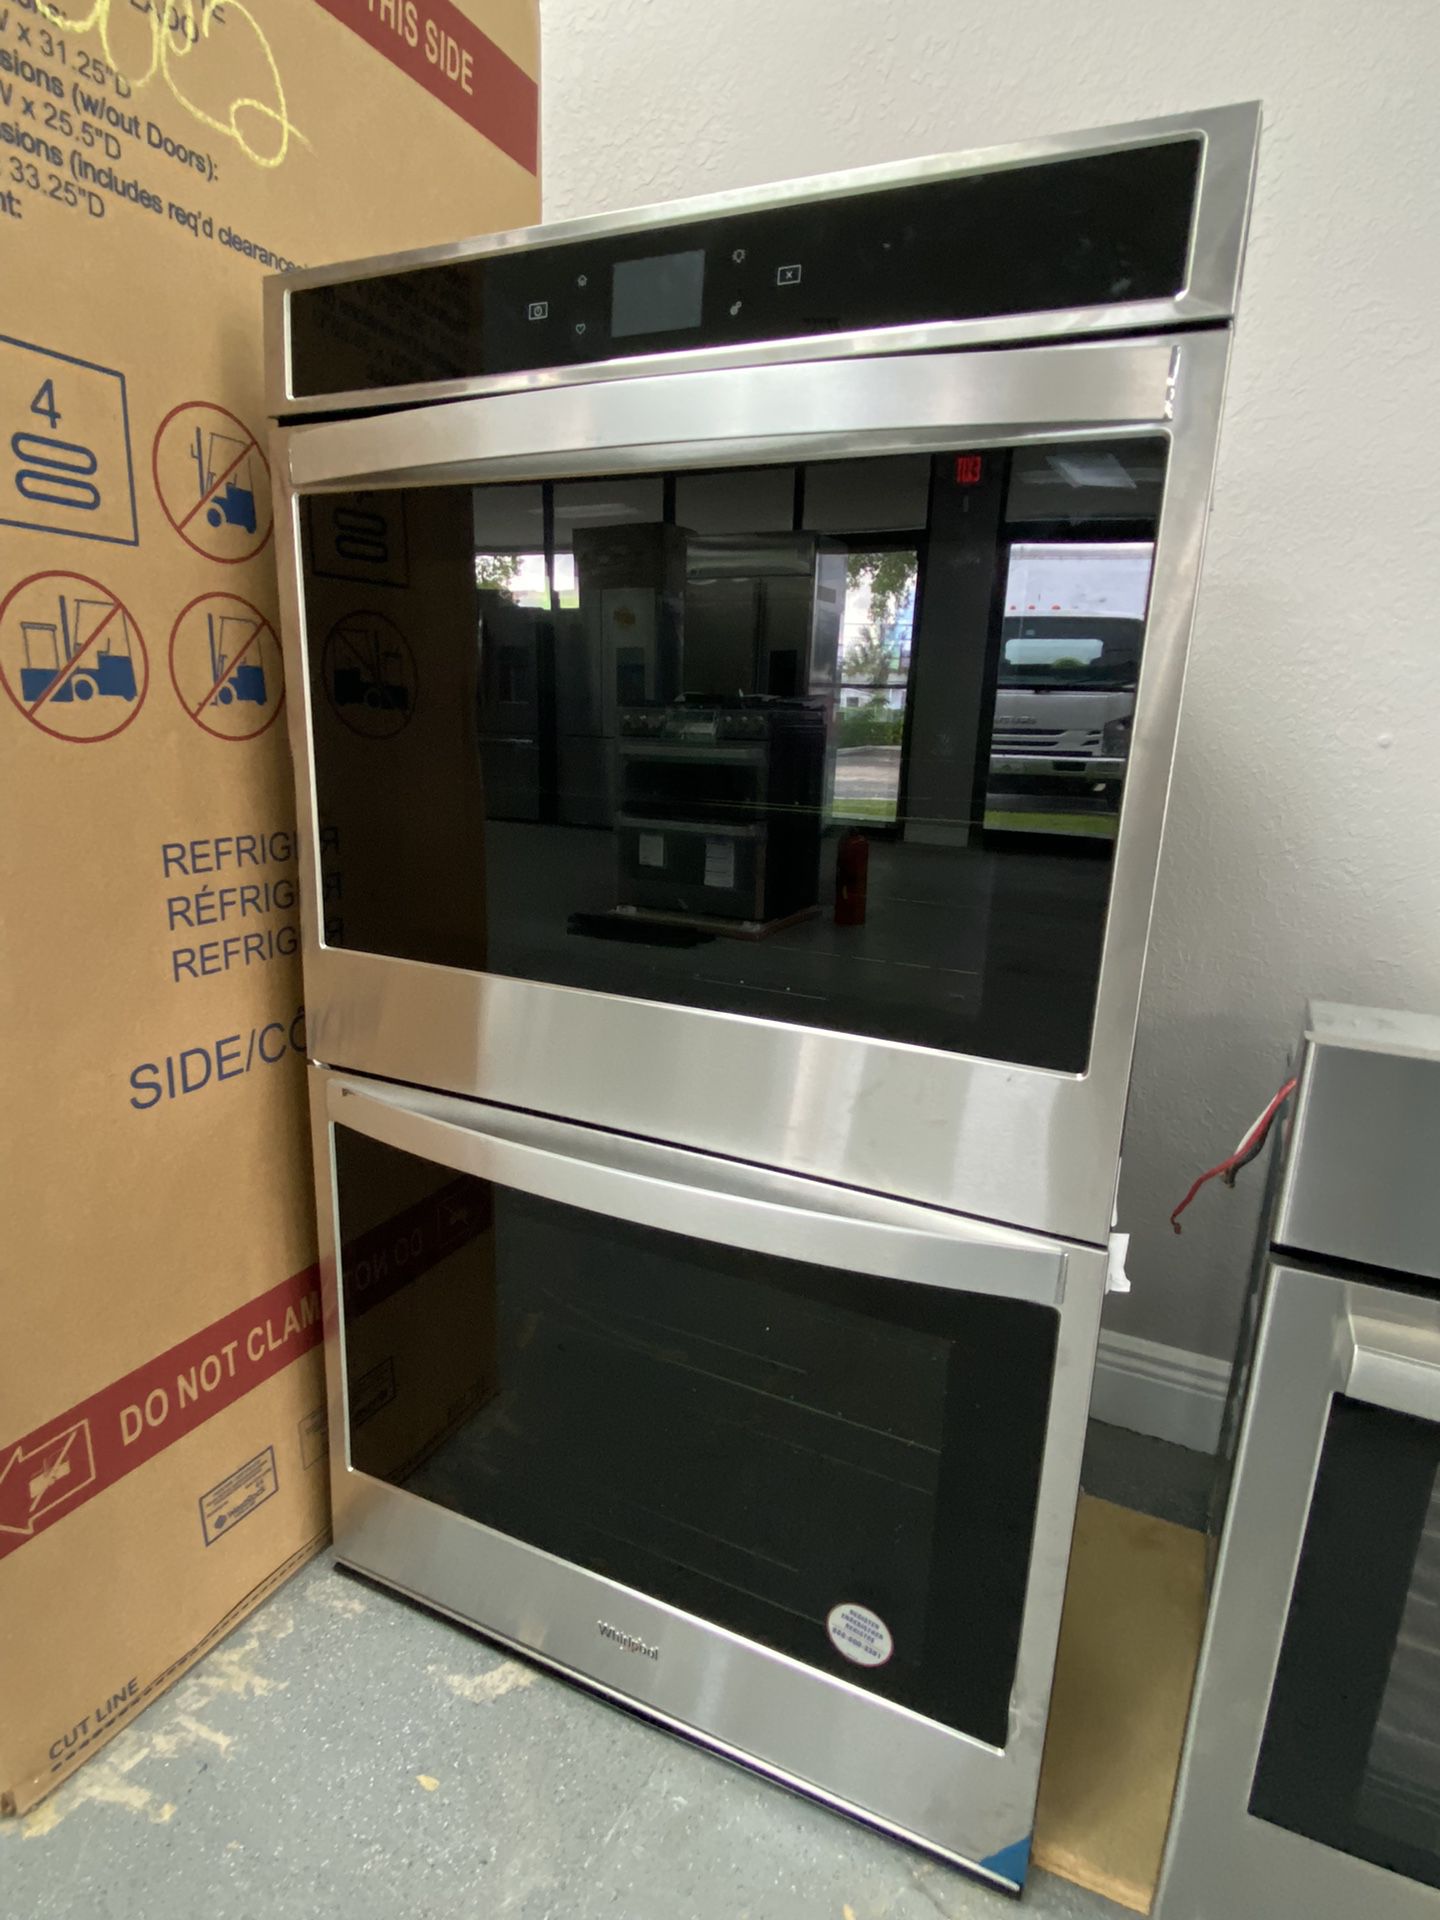 30” Whirlpool Double Oven Stainless Steel